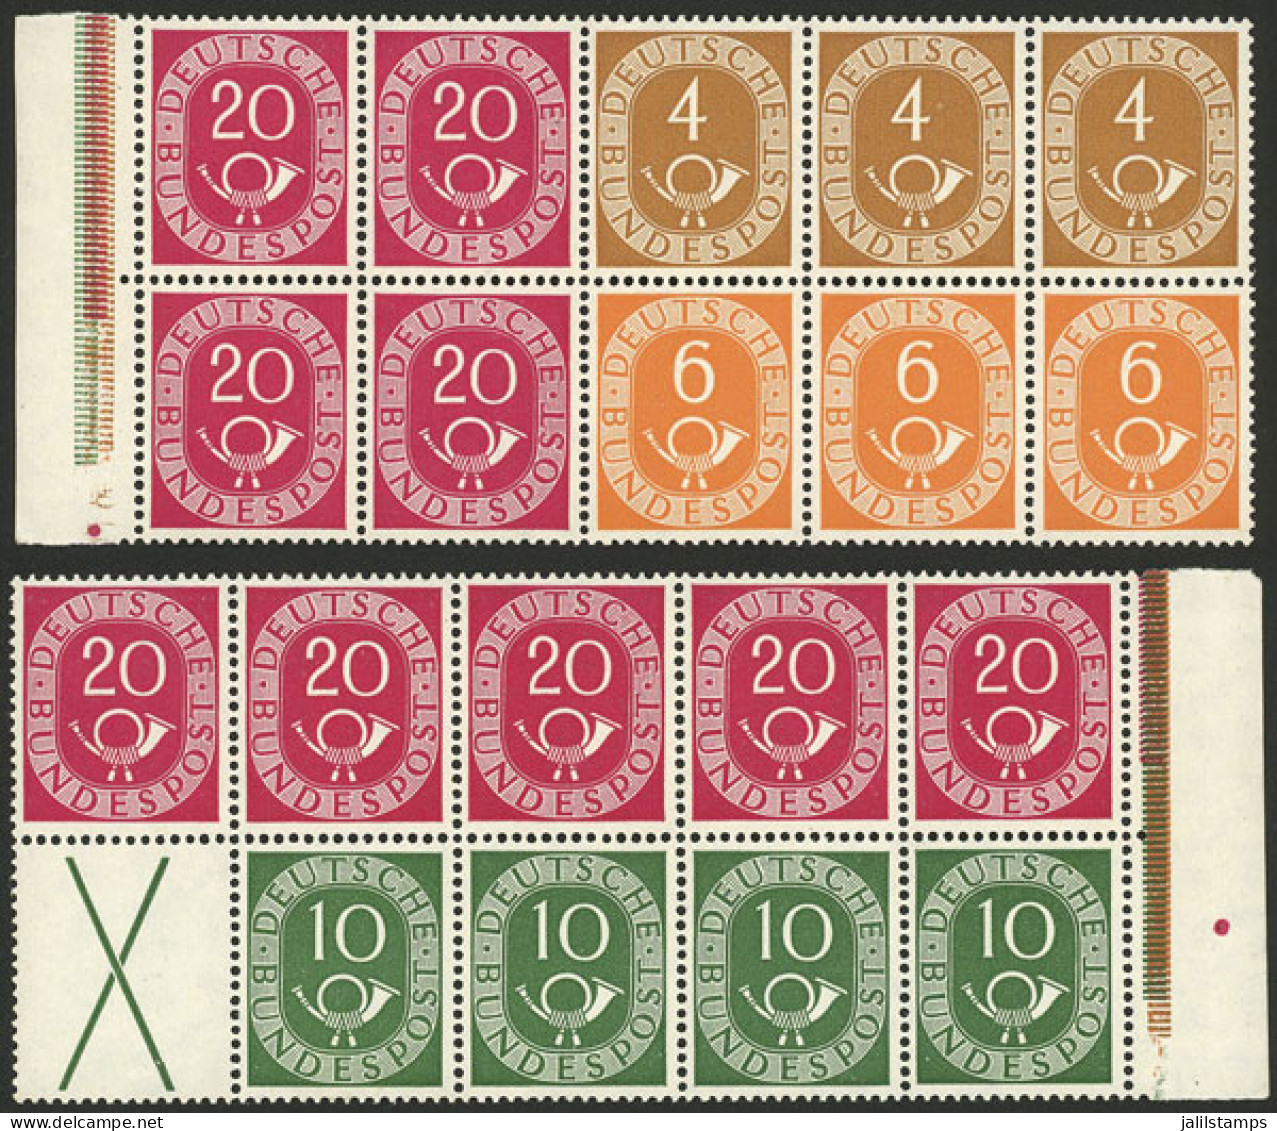 WEST GERMANY: Yvert 10 + Other Values, 1951/2 Post Horn, The 2 Panes Of The Booklet, Mint With Tiny Hinge Marks, Excelle - Ungebraucht